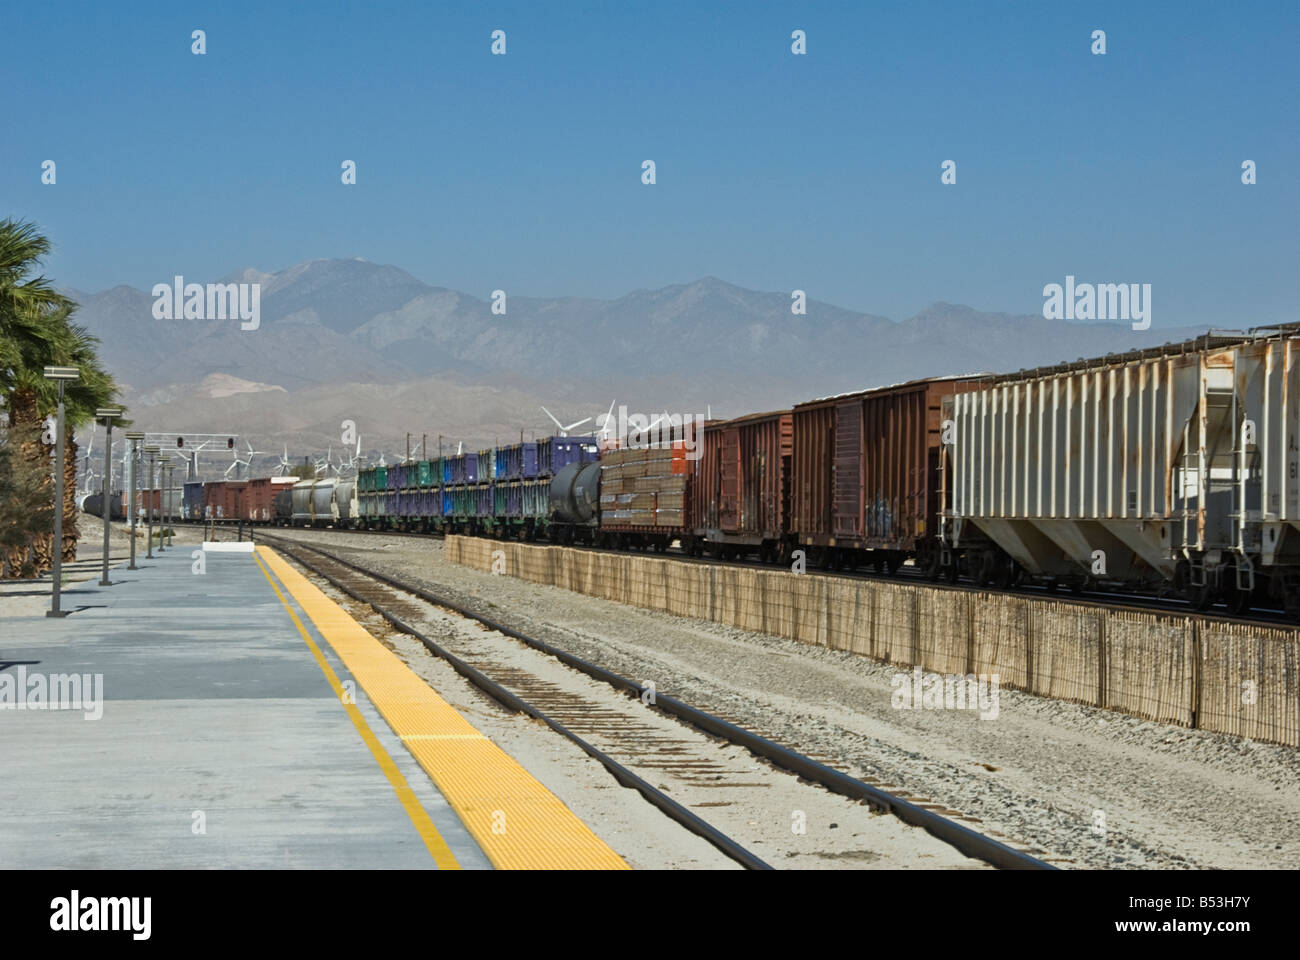 The Palm Springs North Amtrak train Station desert city in Riverside County, California Railroad tracks south of Interstate 10 Stock Photo